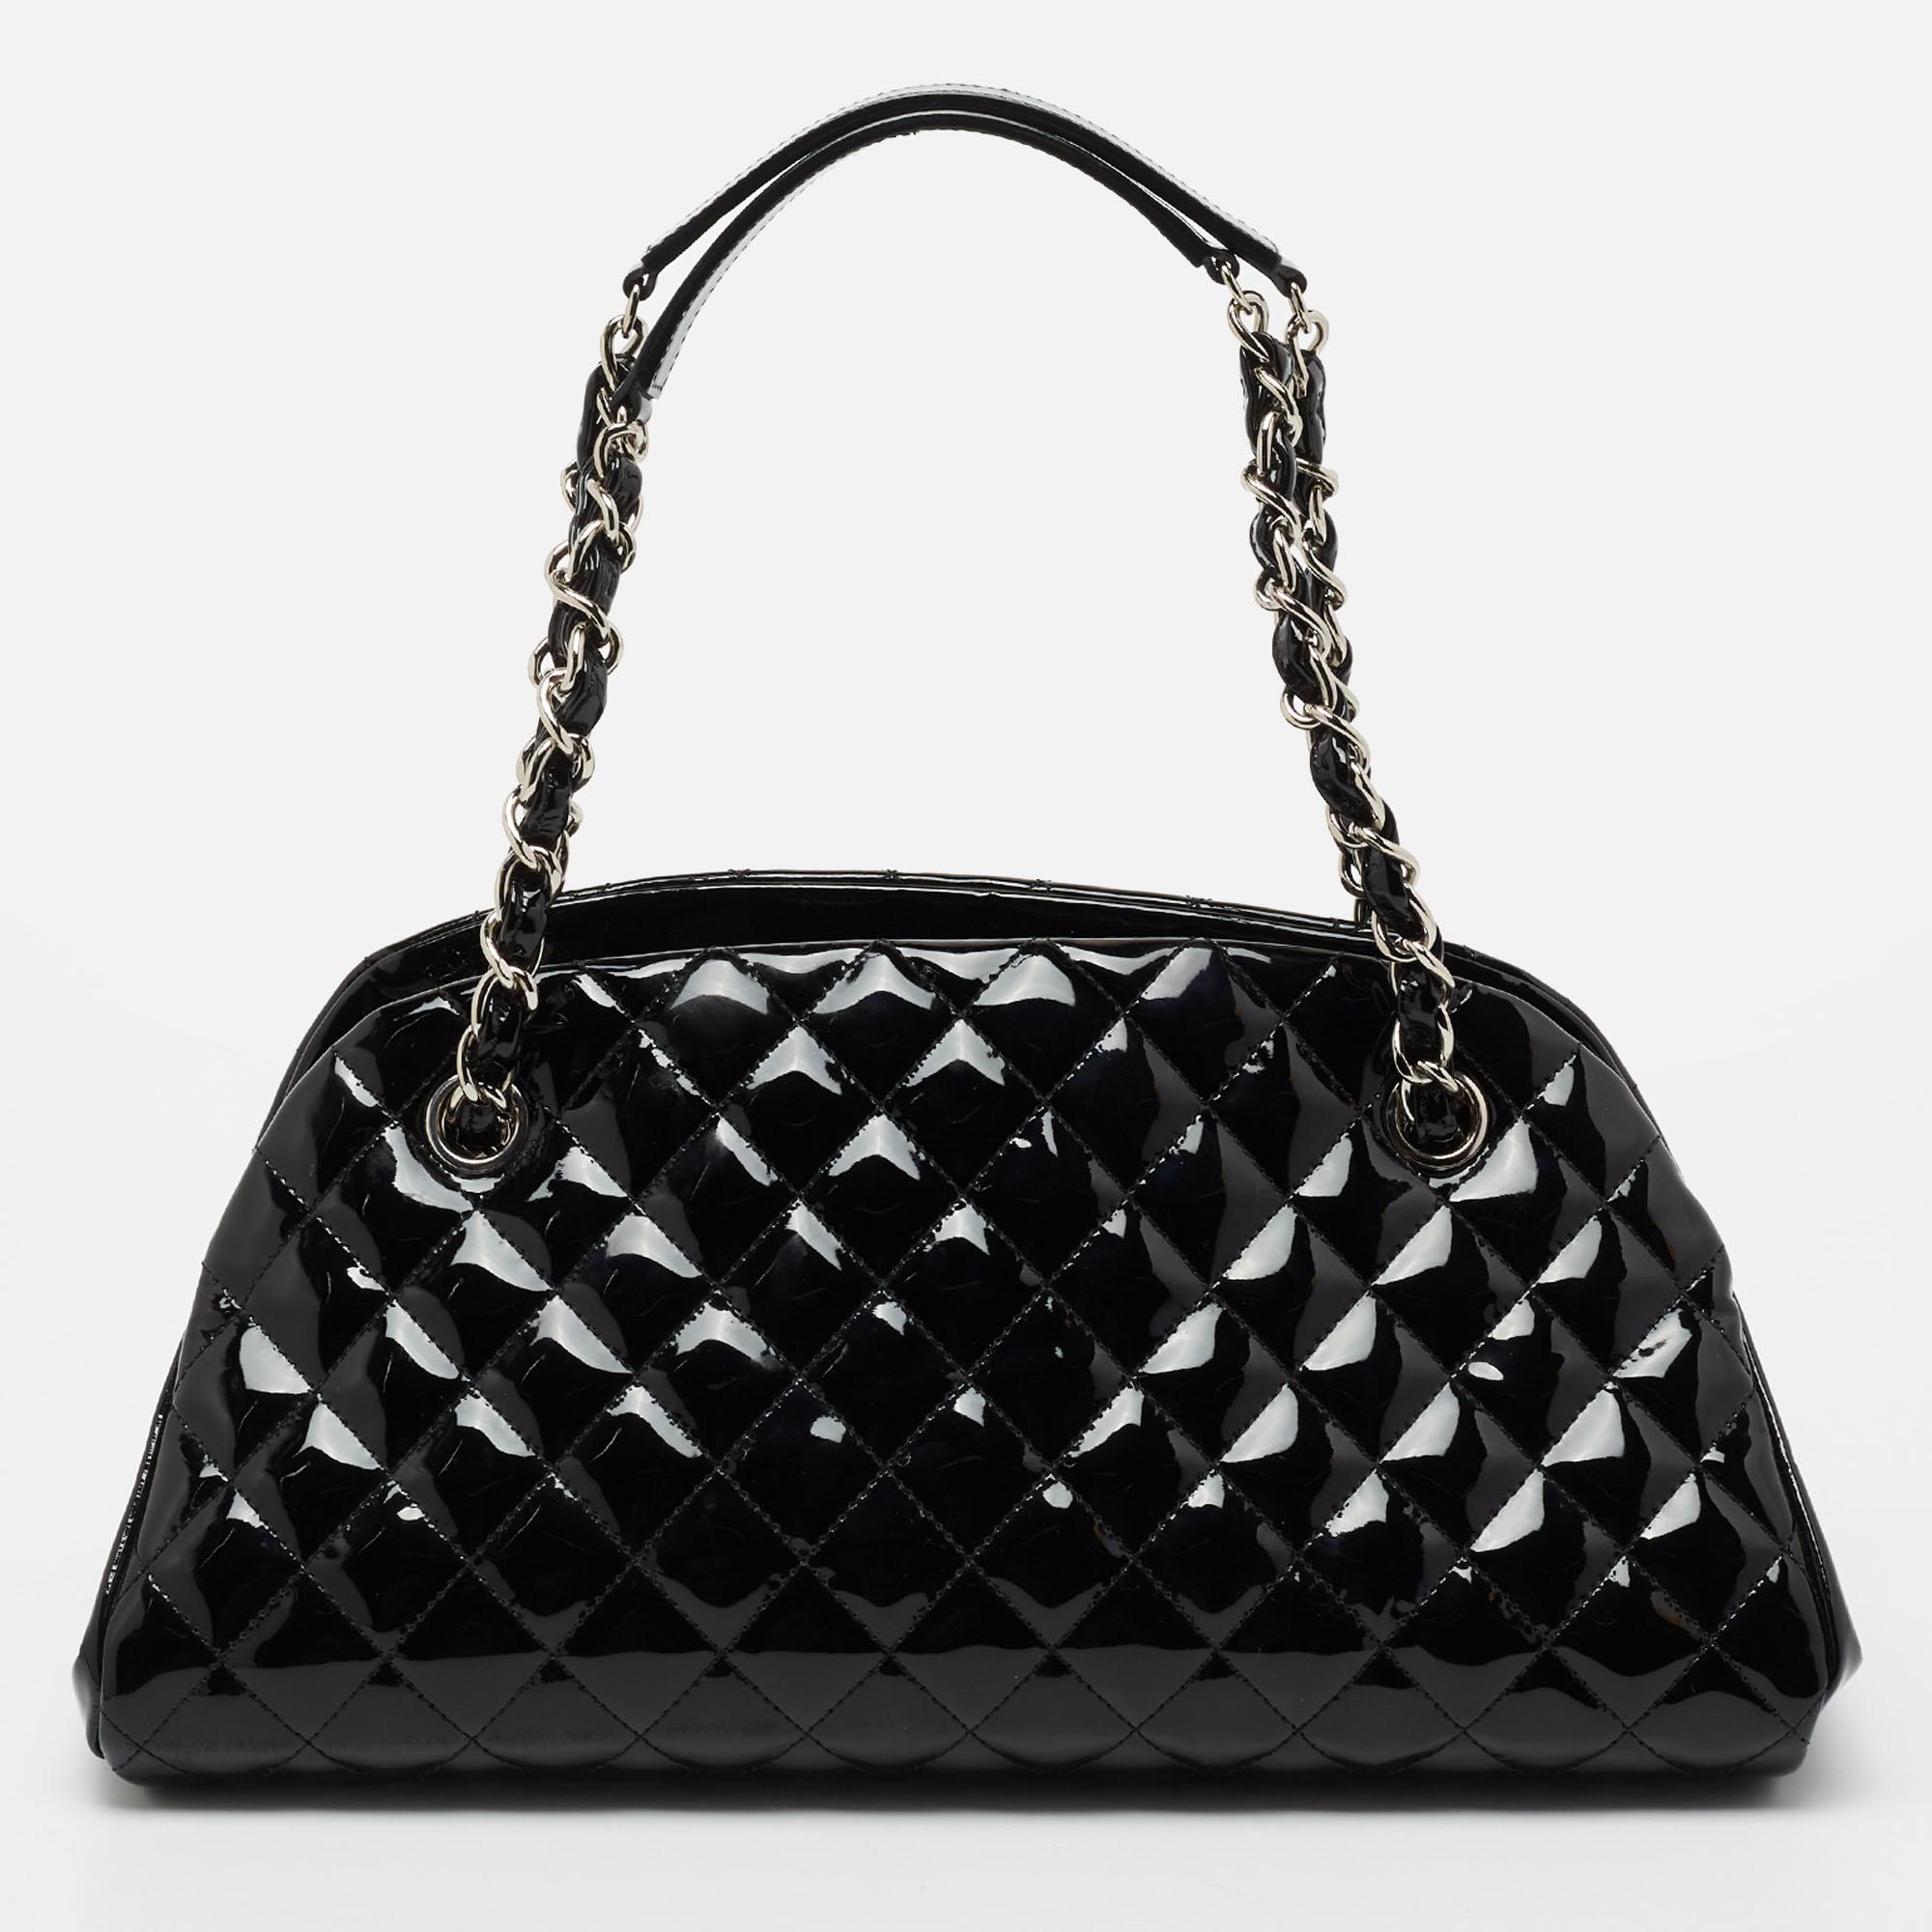 The Just Mademoiselle is another loved bag from Chanel. Crafted from patent leather, this beauty in black is lined with canvas and held by chain handles. This bag has well-sized compartments for your necessities and a CC charm for you to flaunt.

